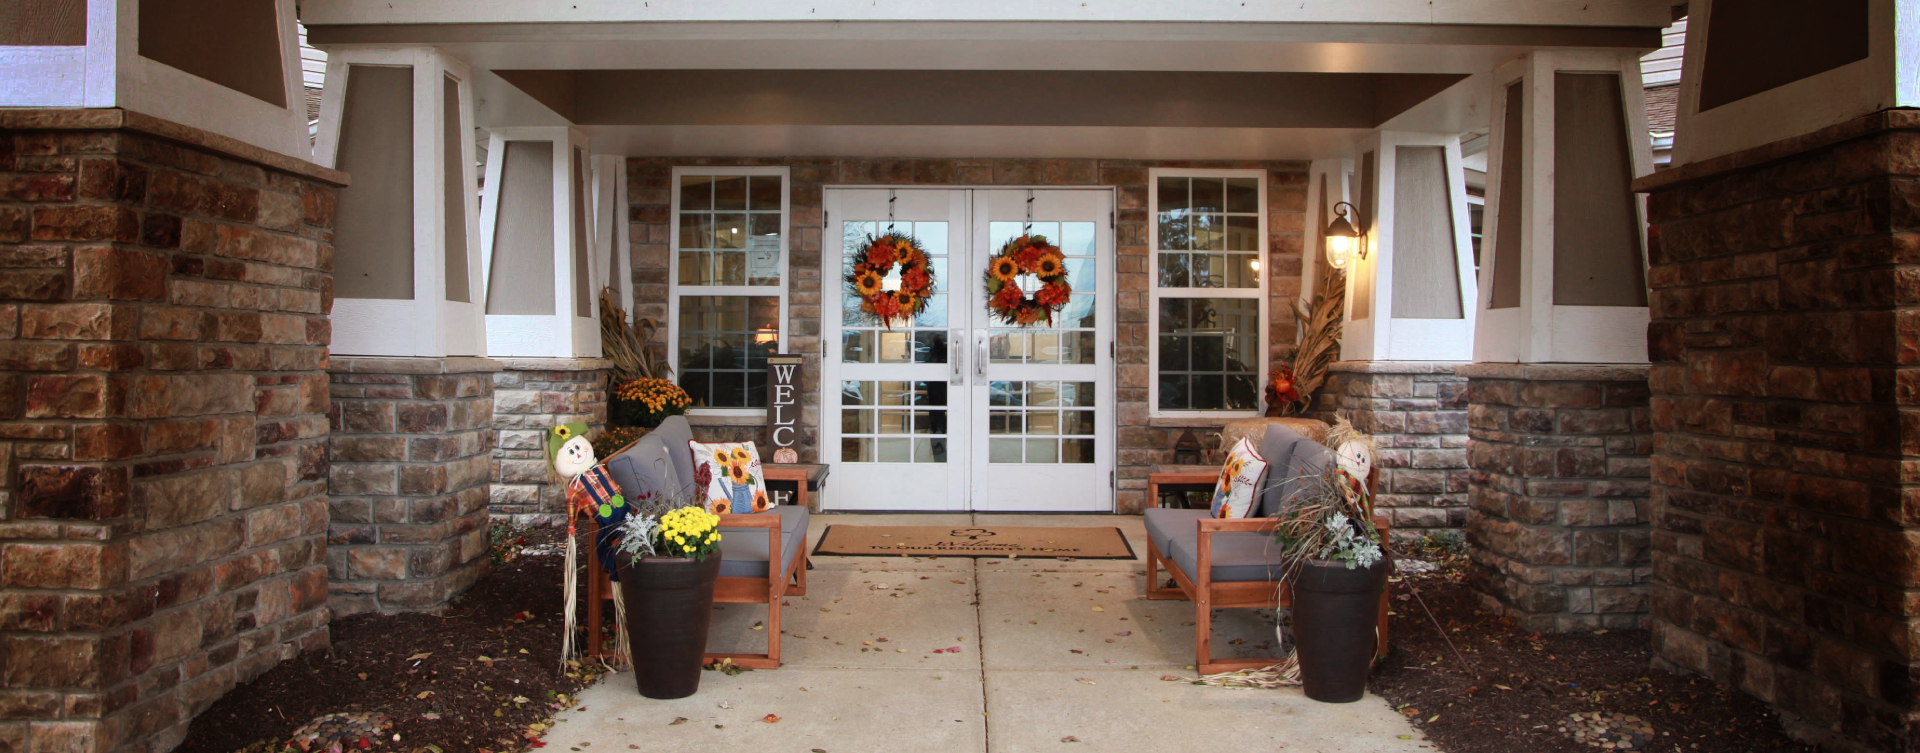 Sip on your favorite drink on the porch at Bickford of St. Charles